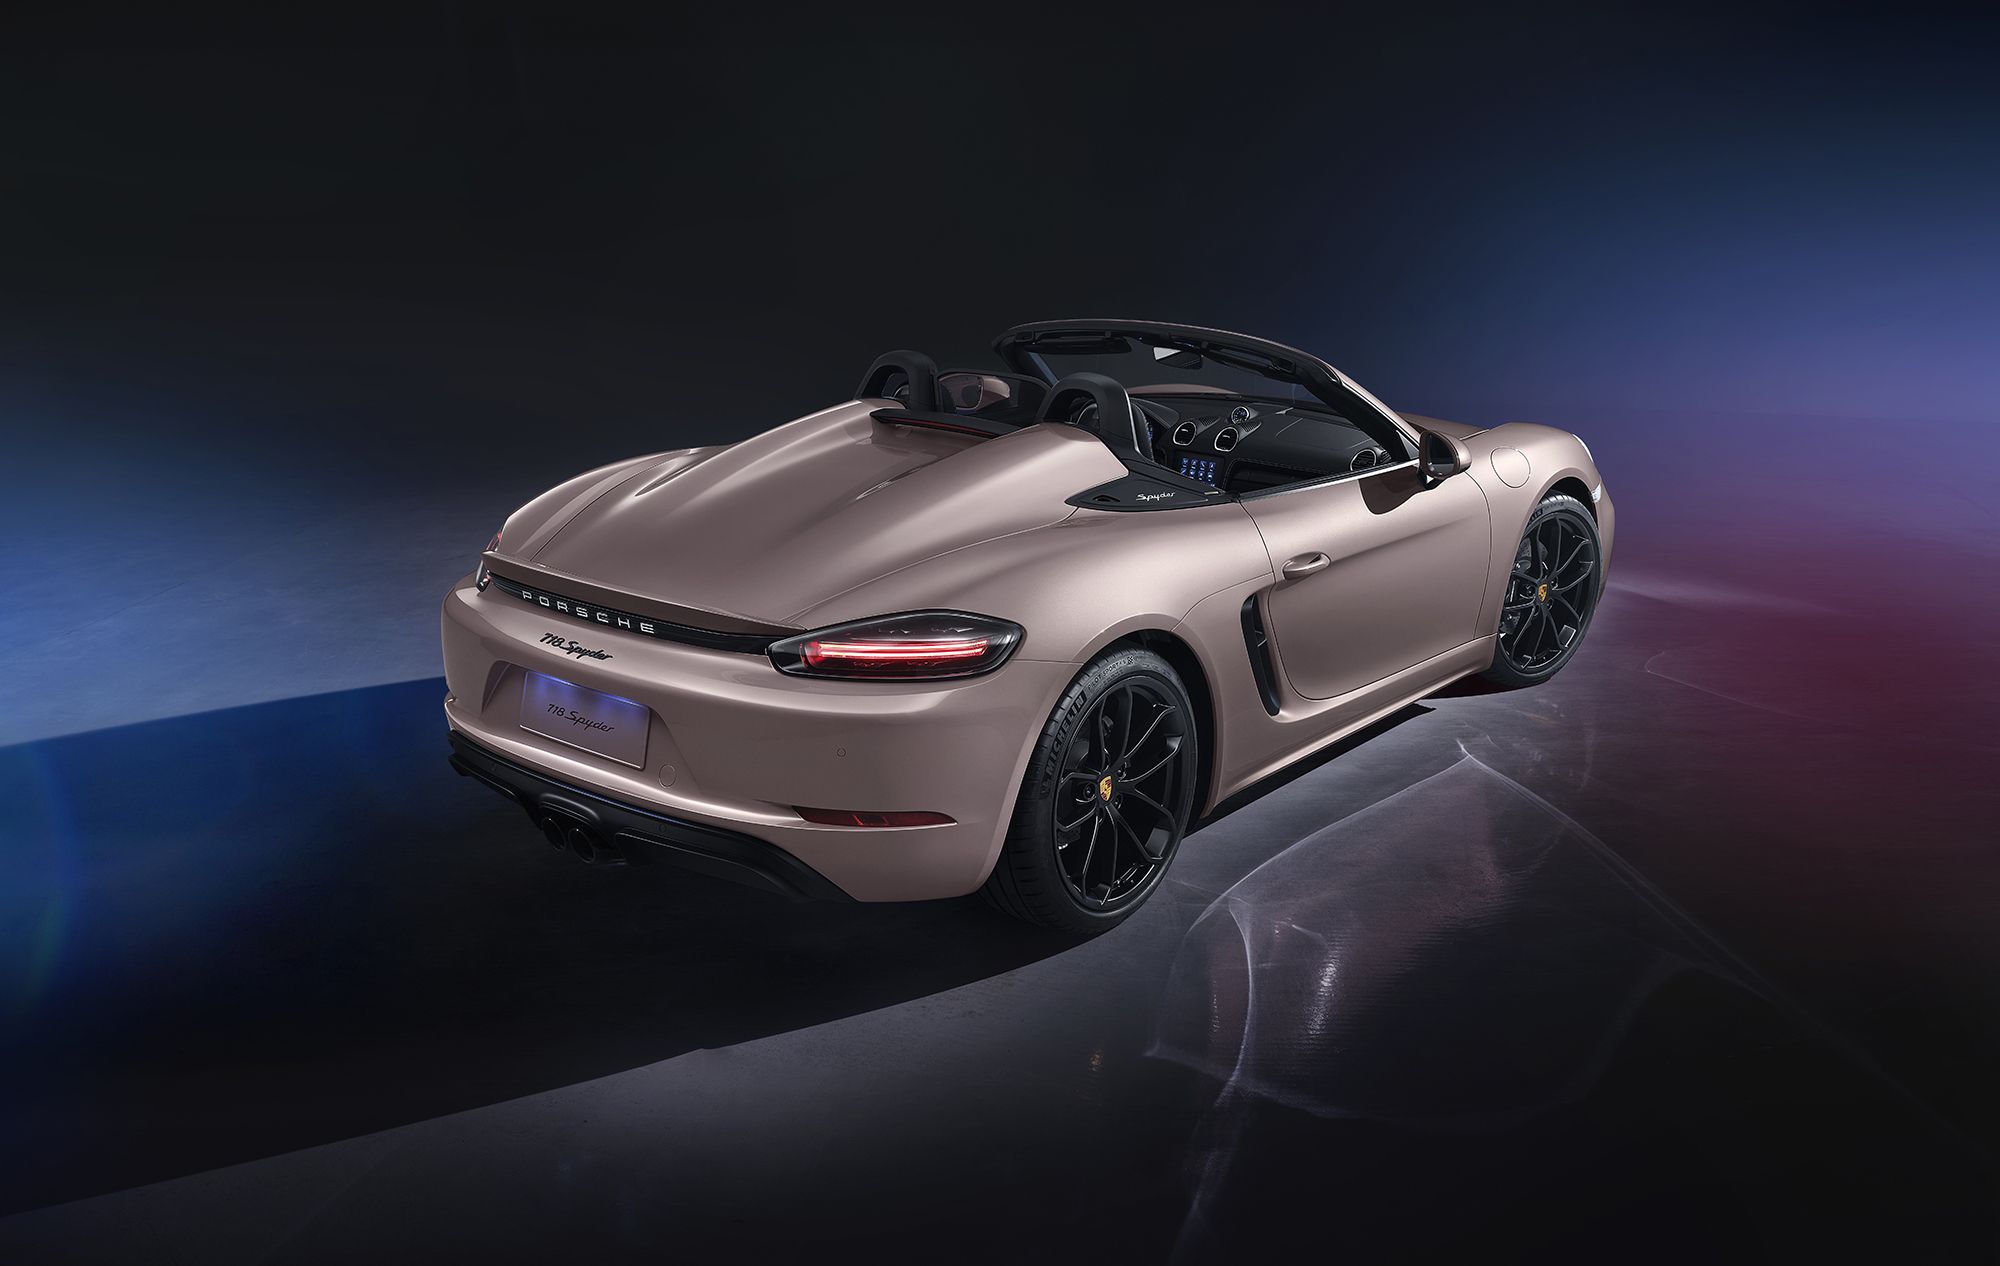 Porsche Made a 2.0-Liter 718 Spyder For China and It's Very Pink